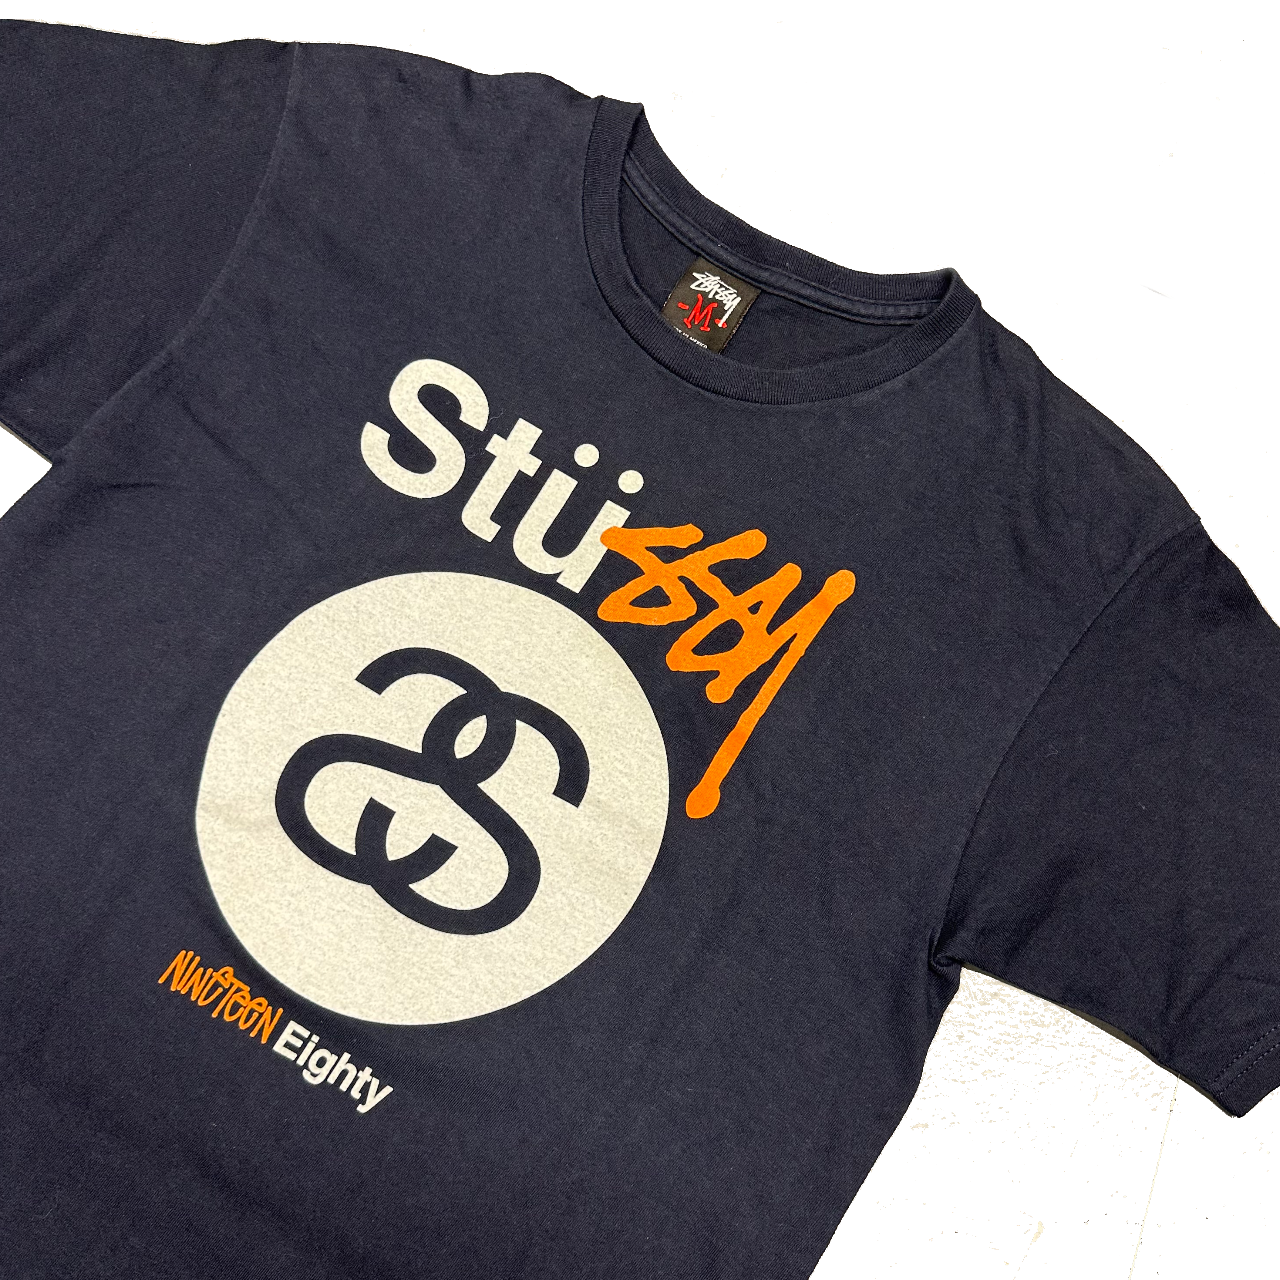 Stüssy Spellout T-Shirt In Navy ( M )